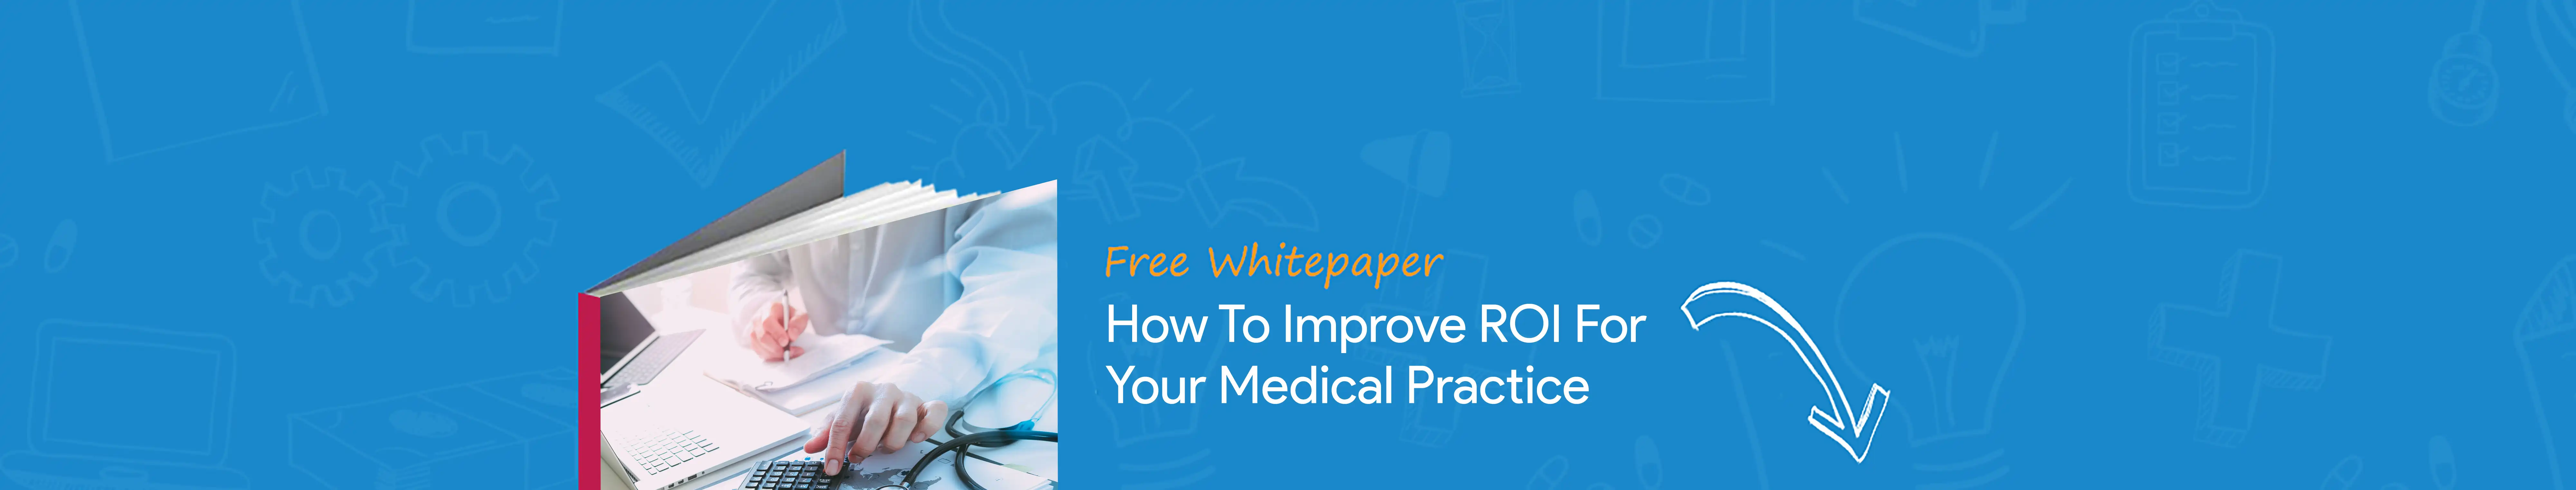 how to improve roi for your medical practice banner